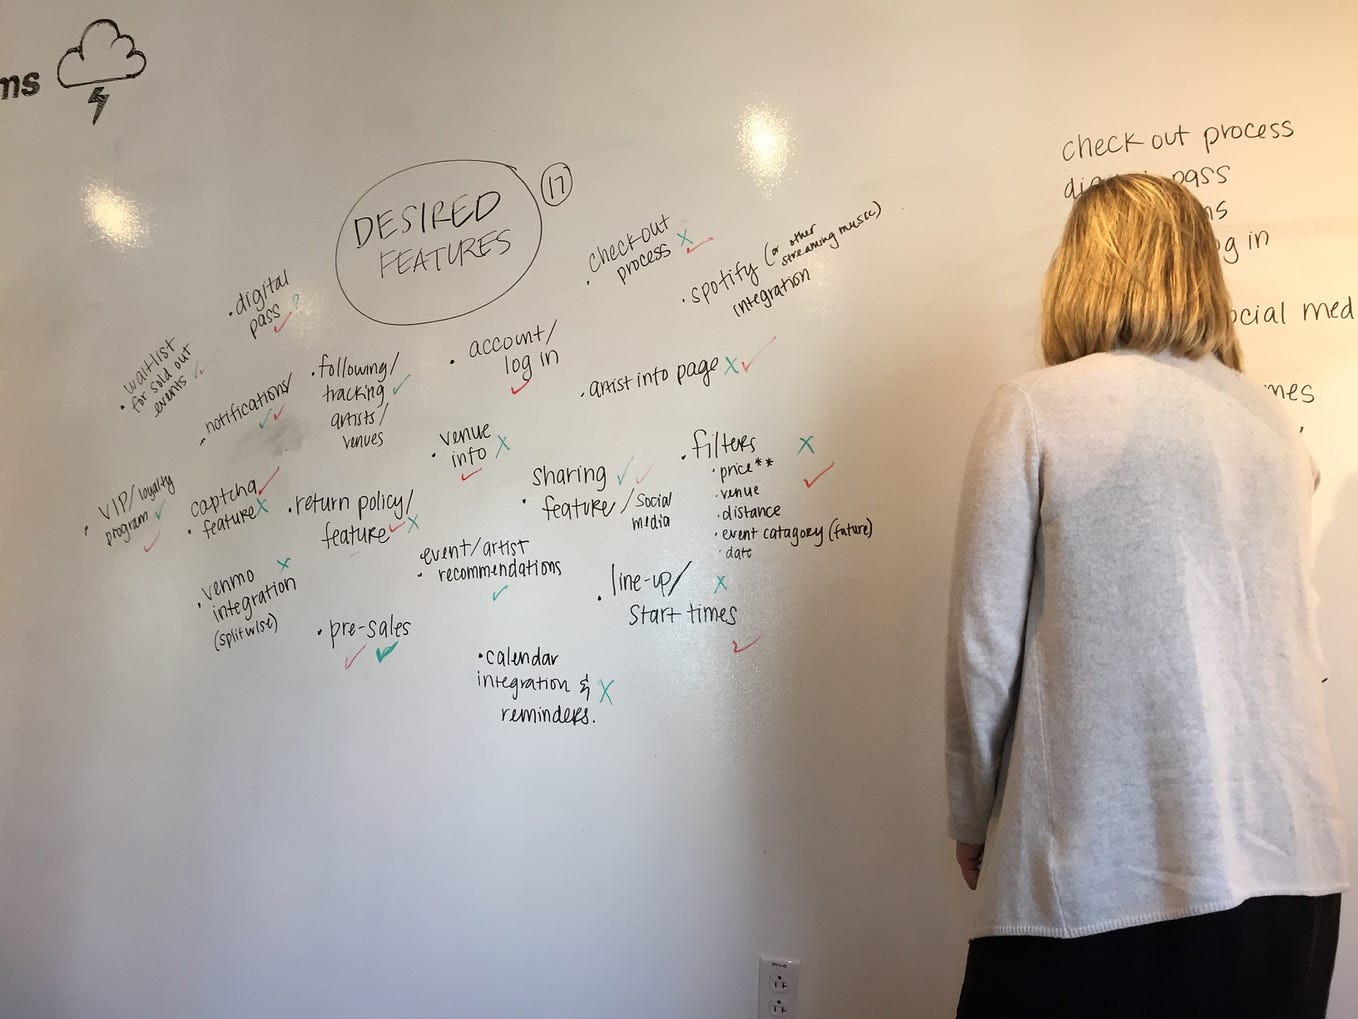 Working as a UX Design Group: The Team Fandango Project